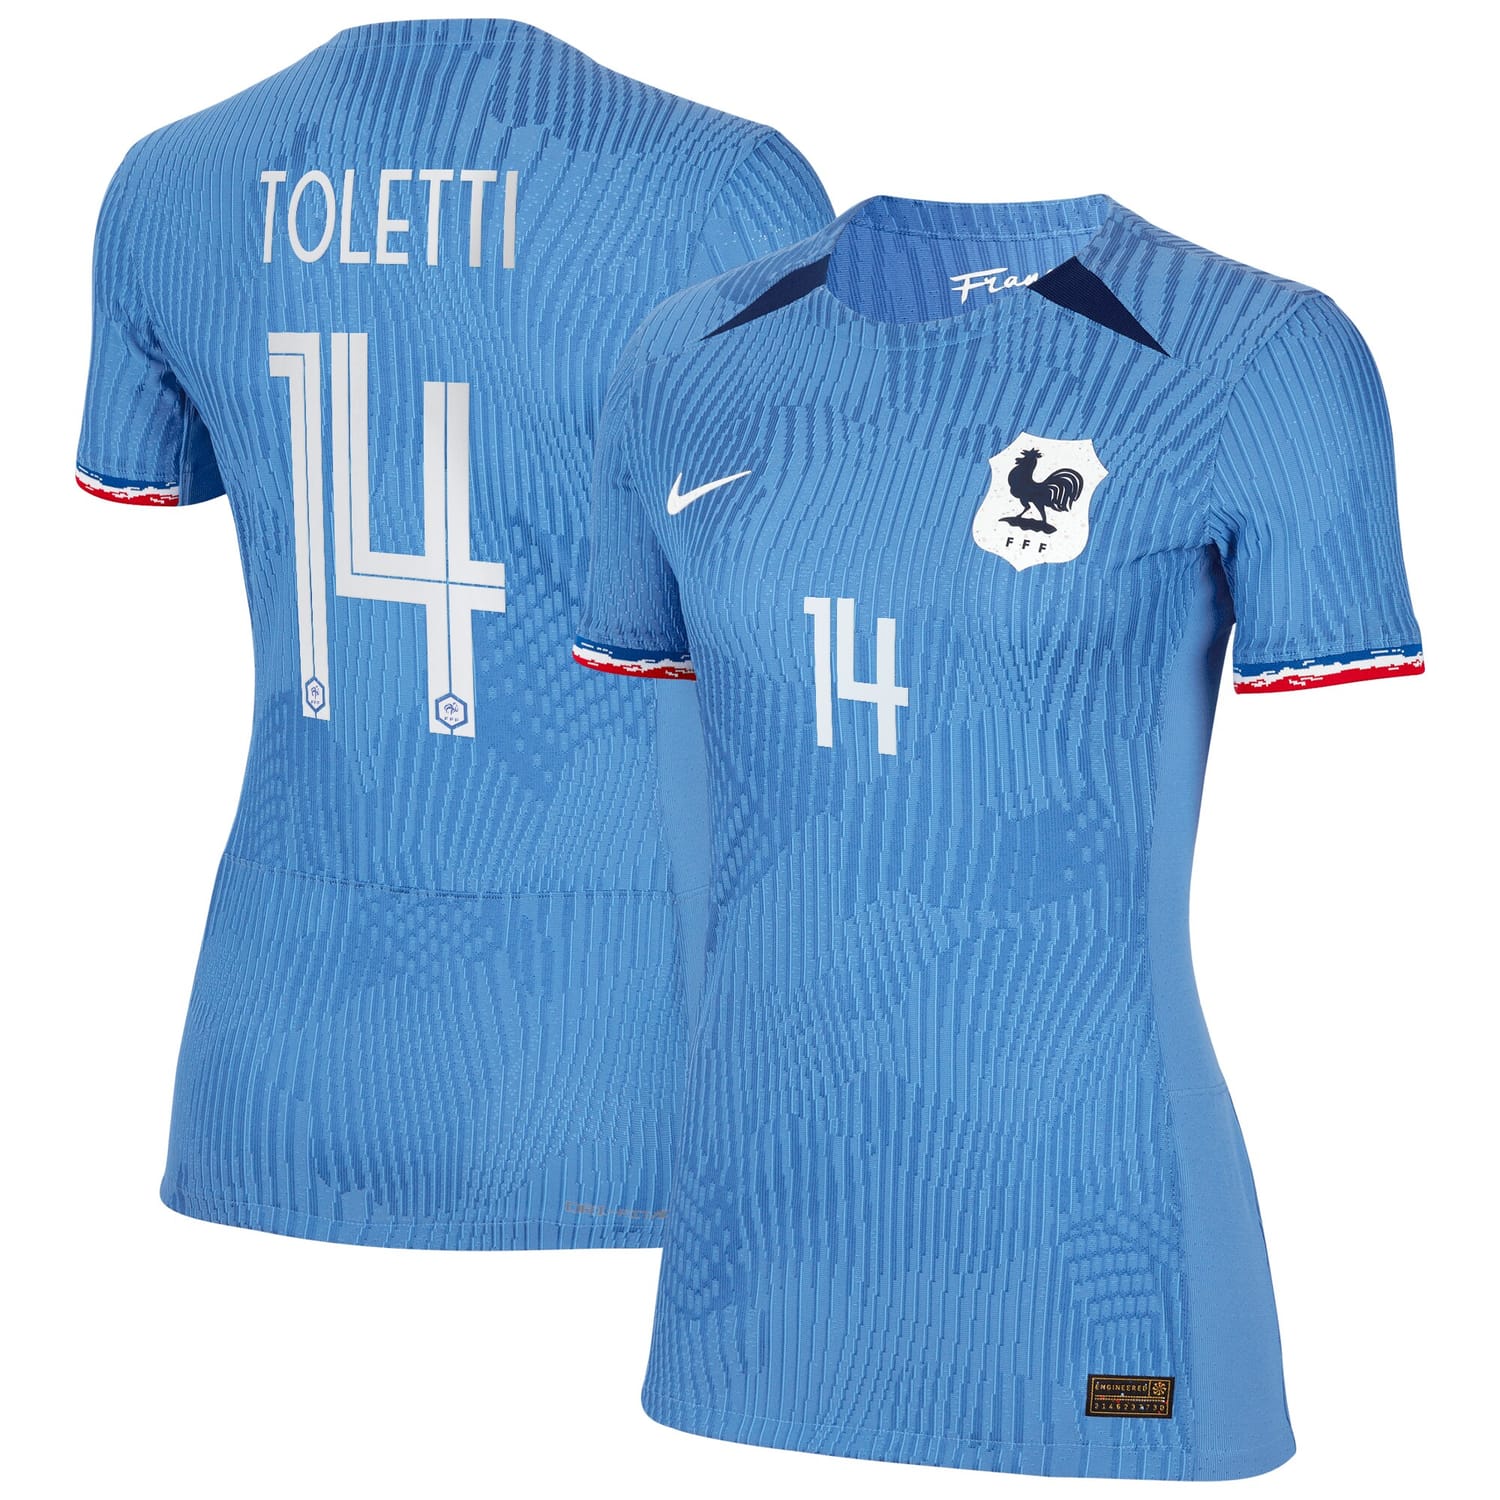 France National Team Home Authentic Jersey Shirt 2023-24 player Sandie Toletti 14 printing for Women